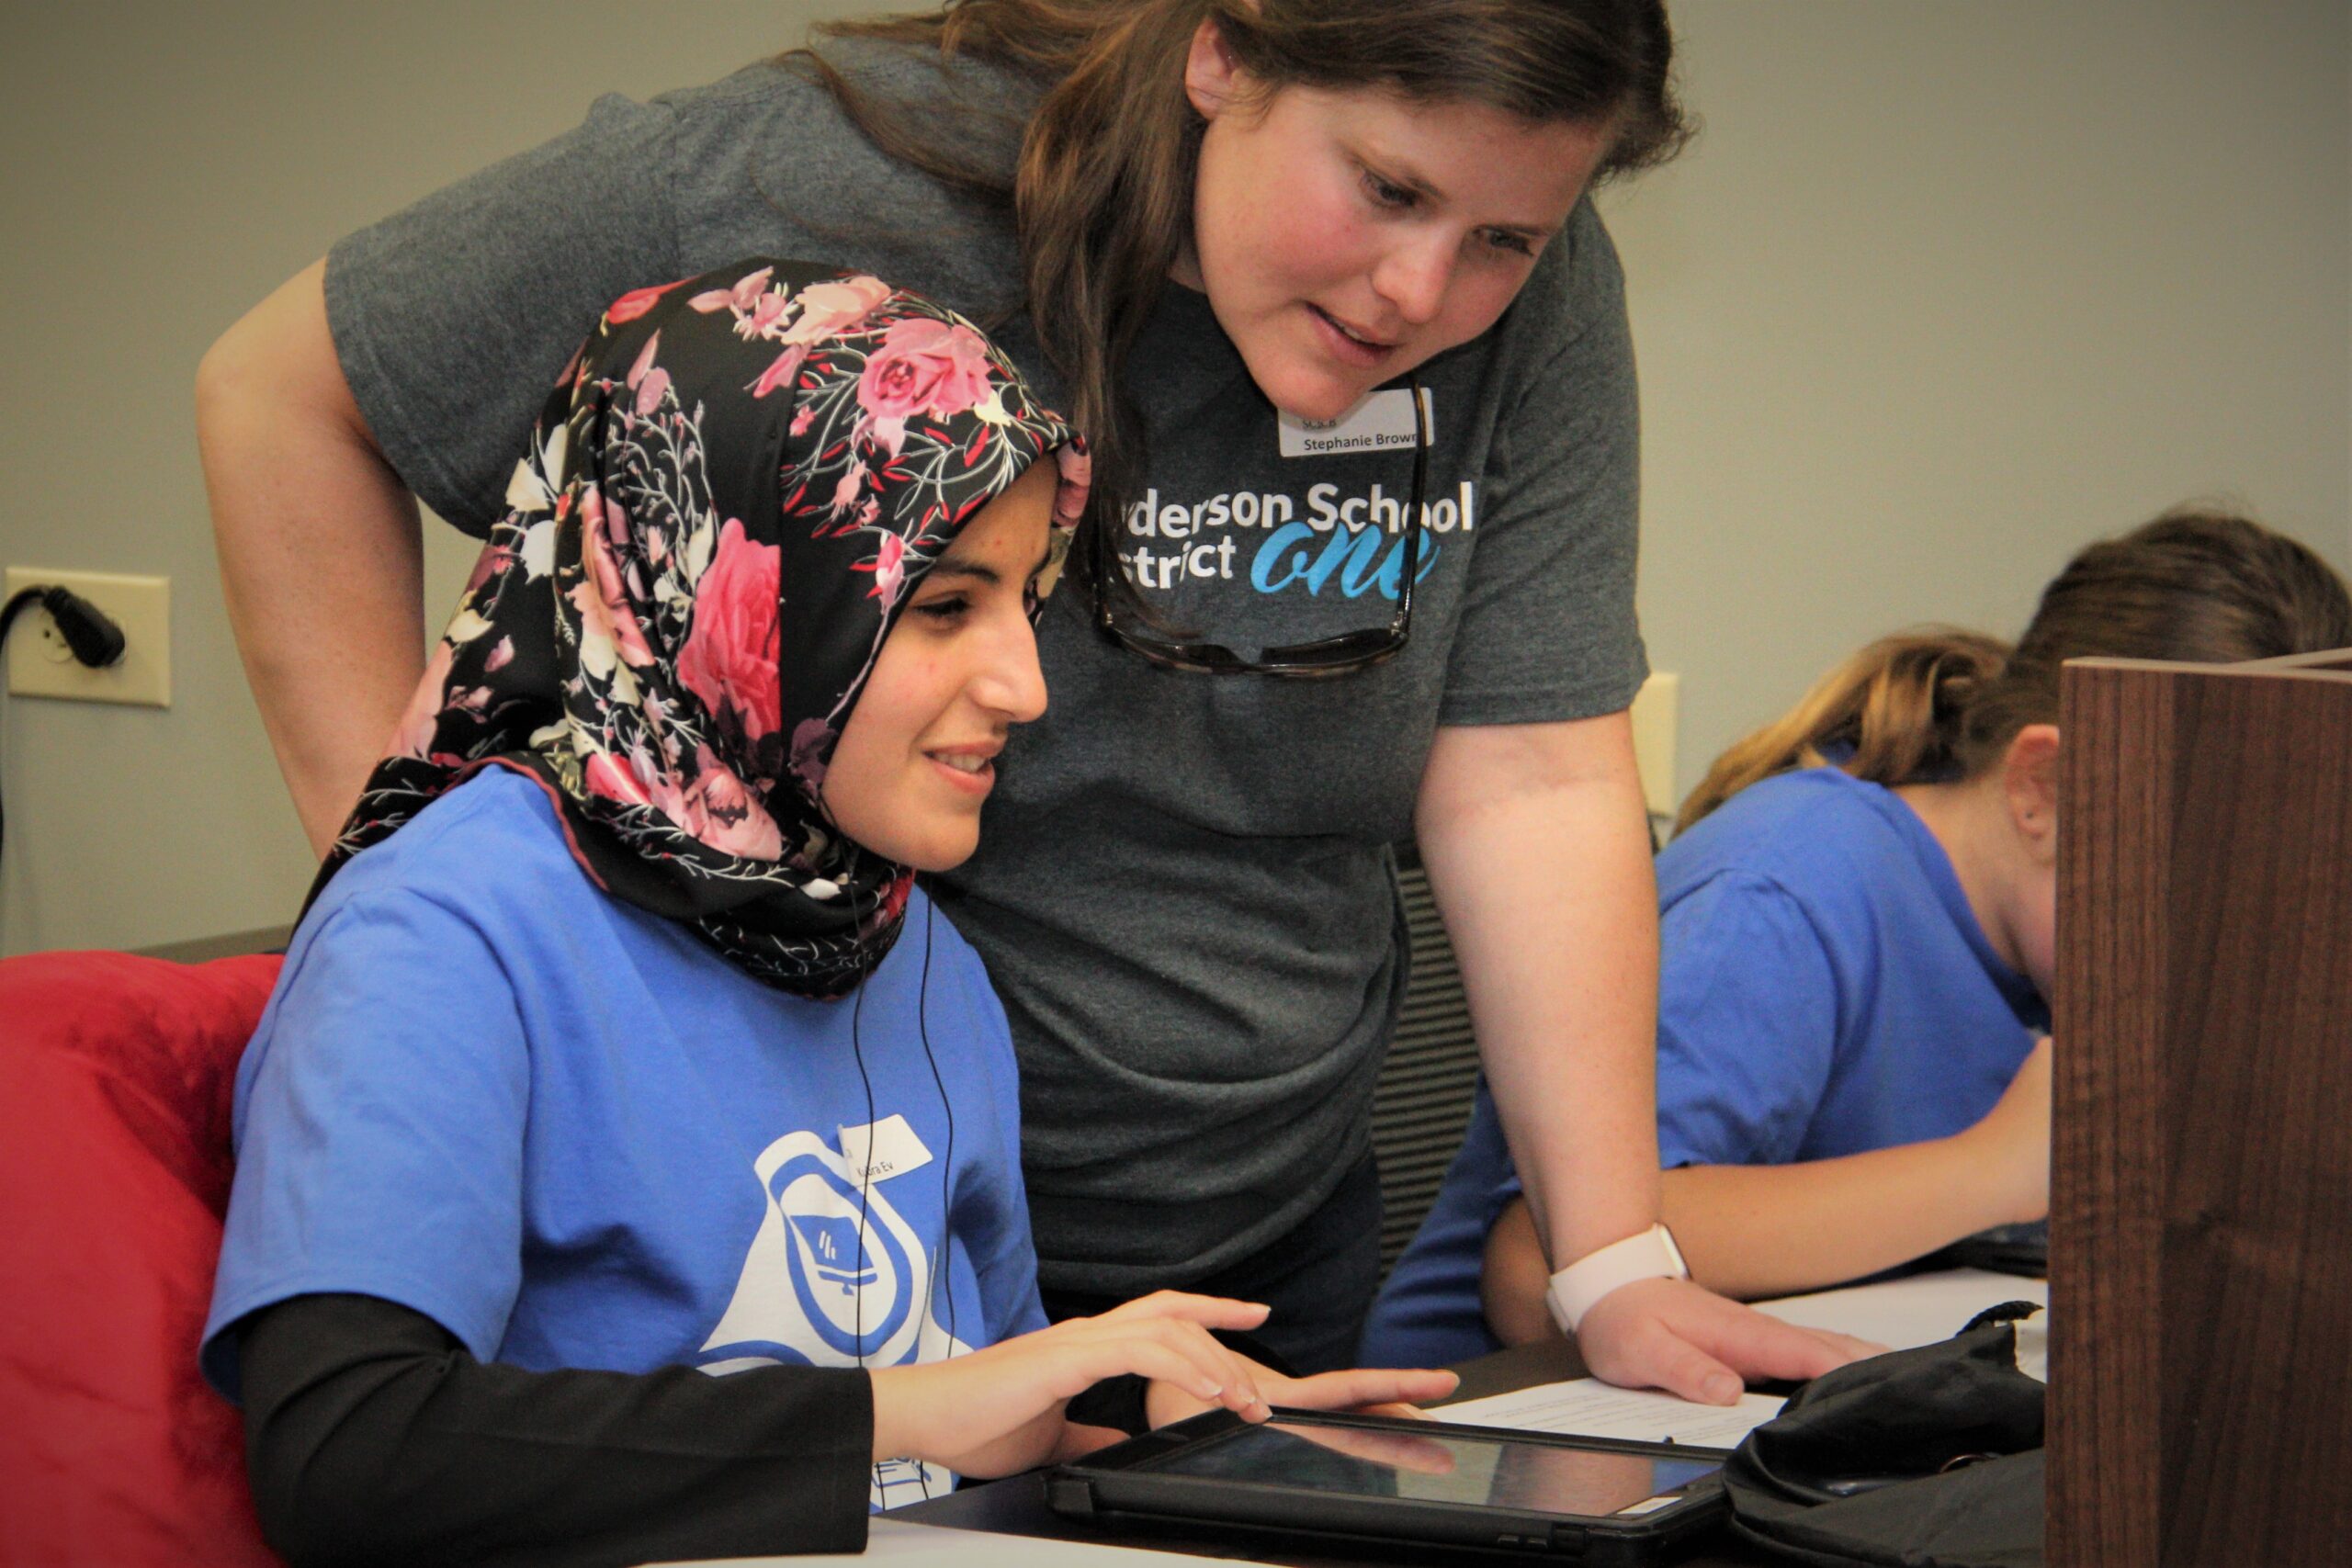 Students show off skills at Tech Olympics